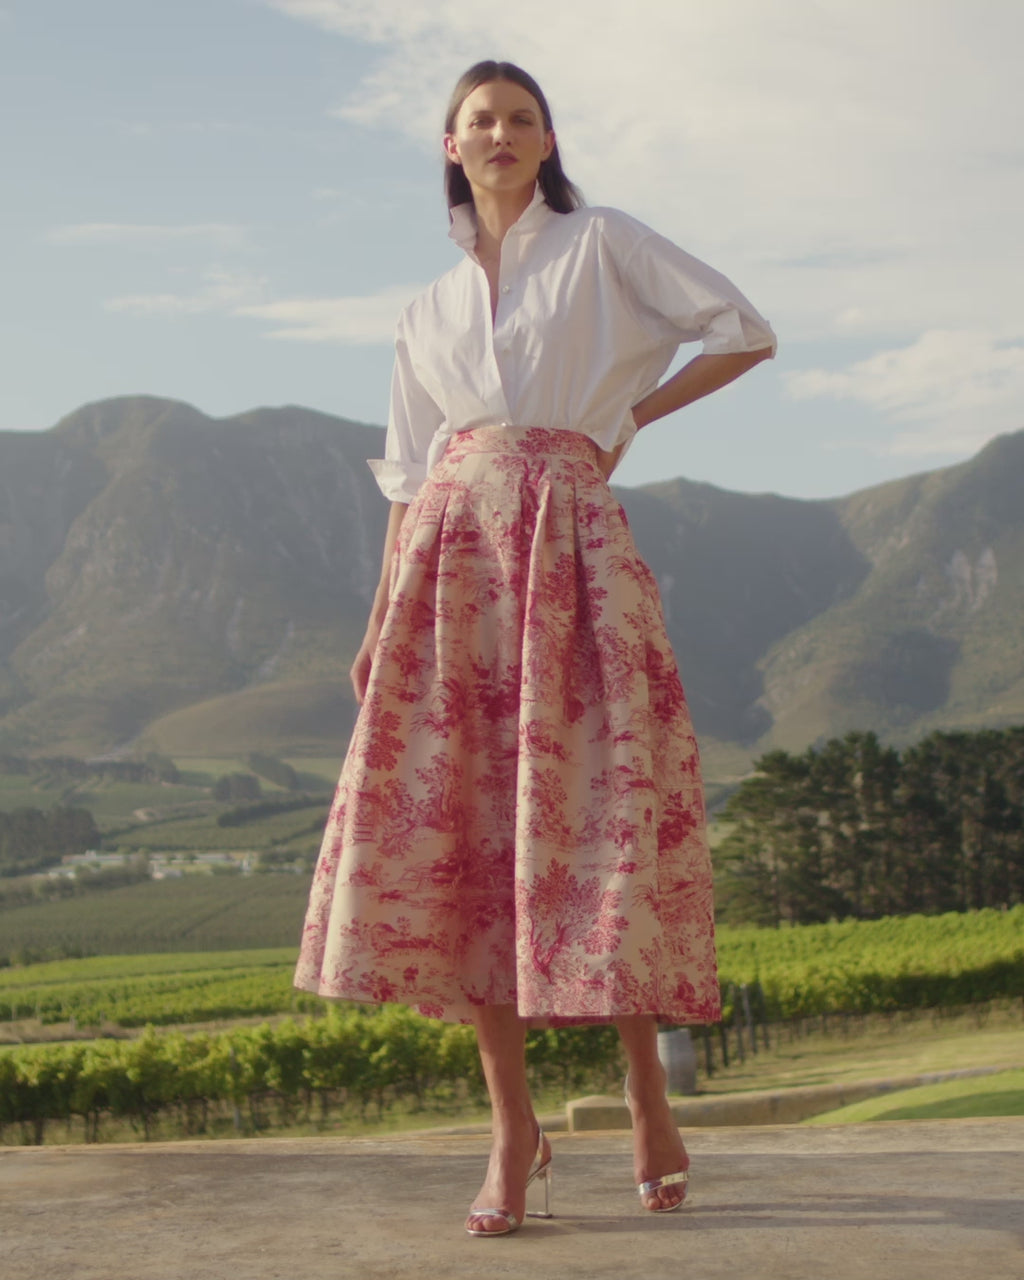 Wiggy Kit | Opera Skirt (Toile De Jouy) | Video of model wearing patterned skirt with white shirt